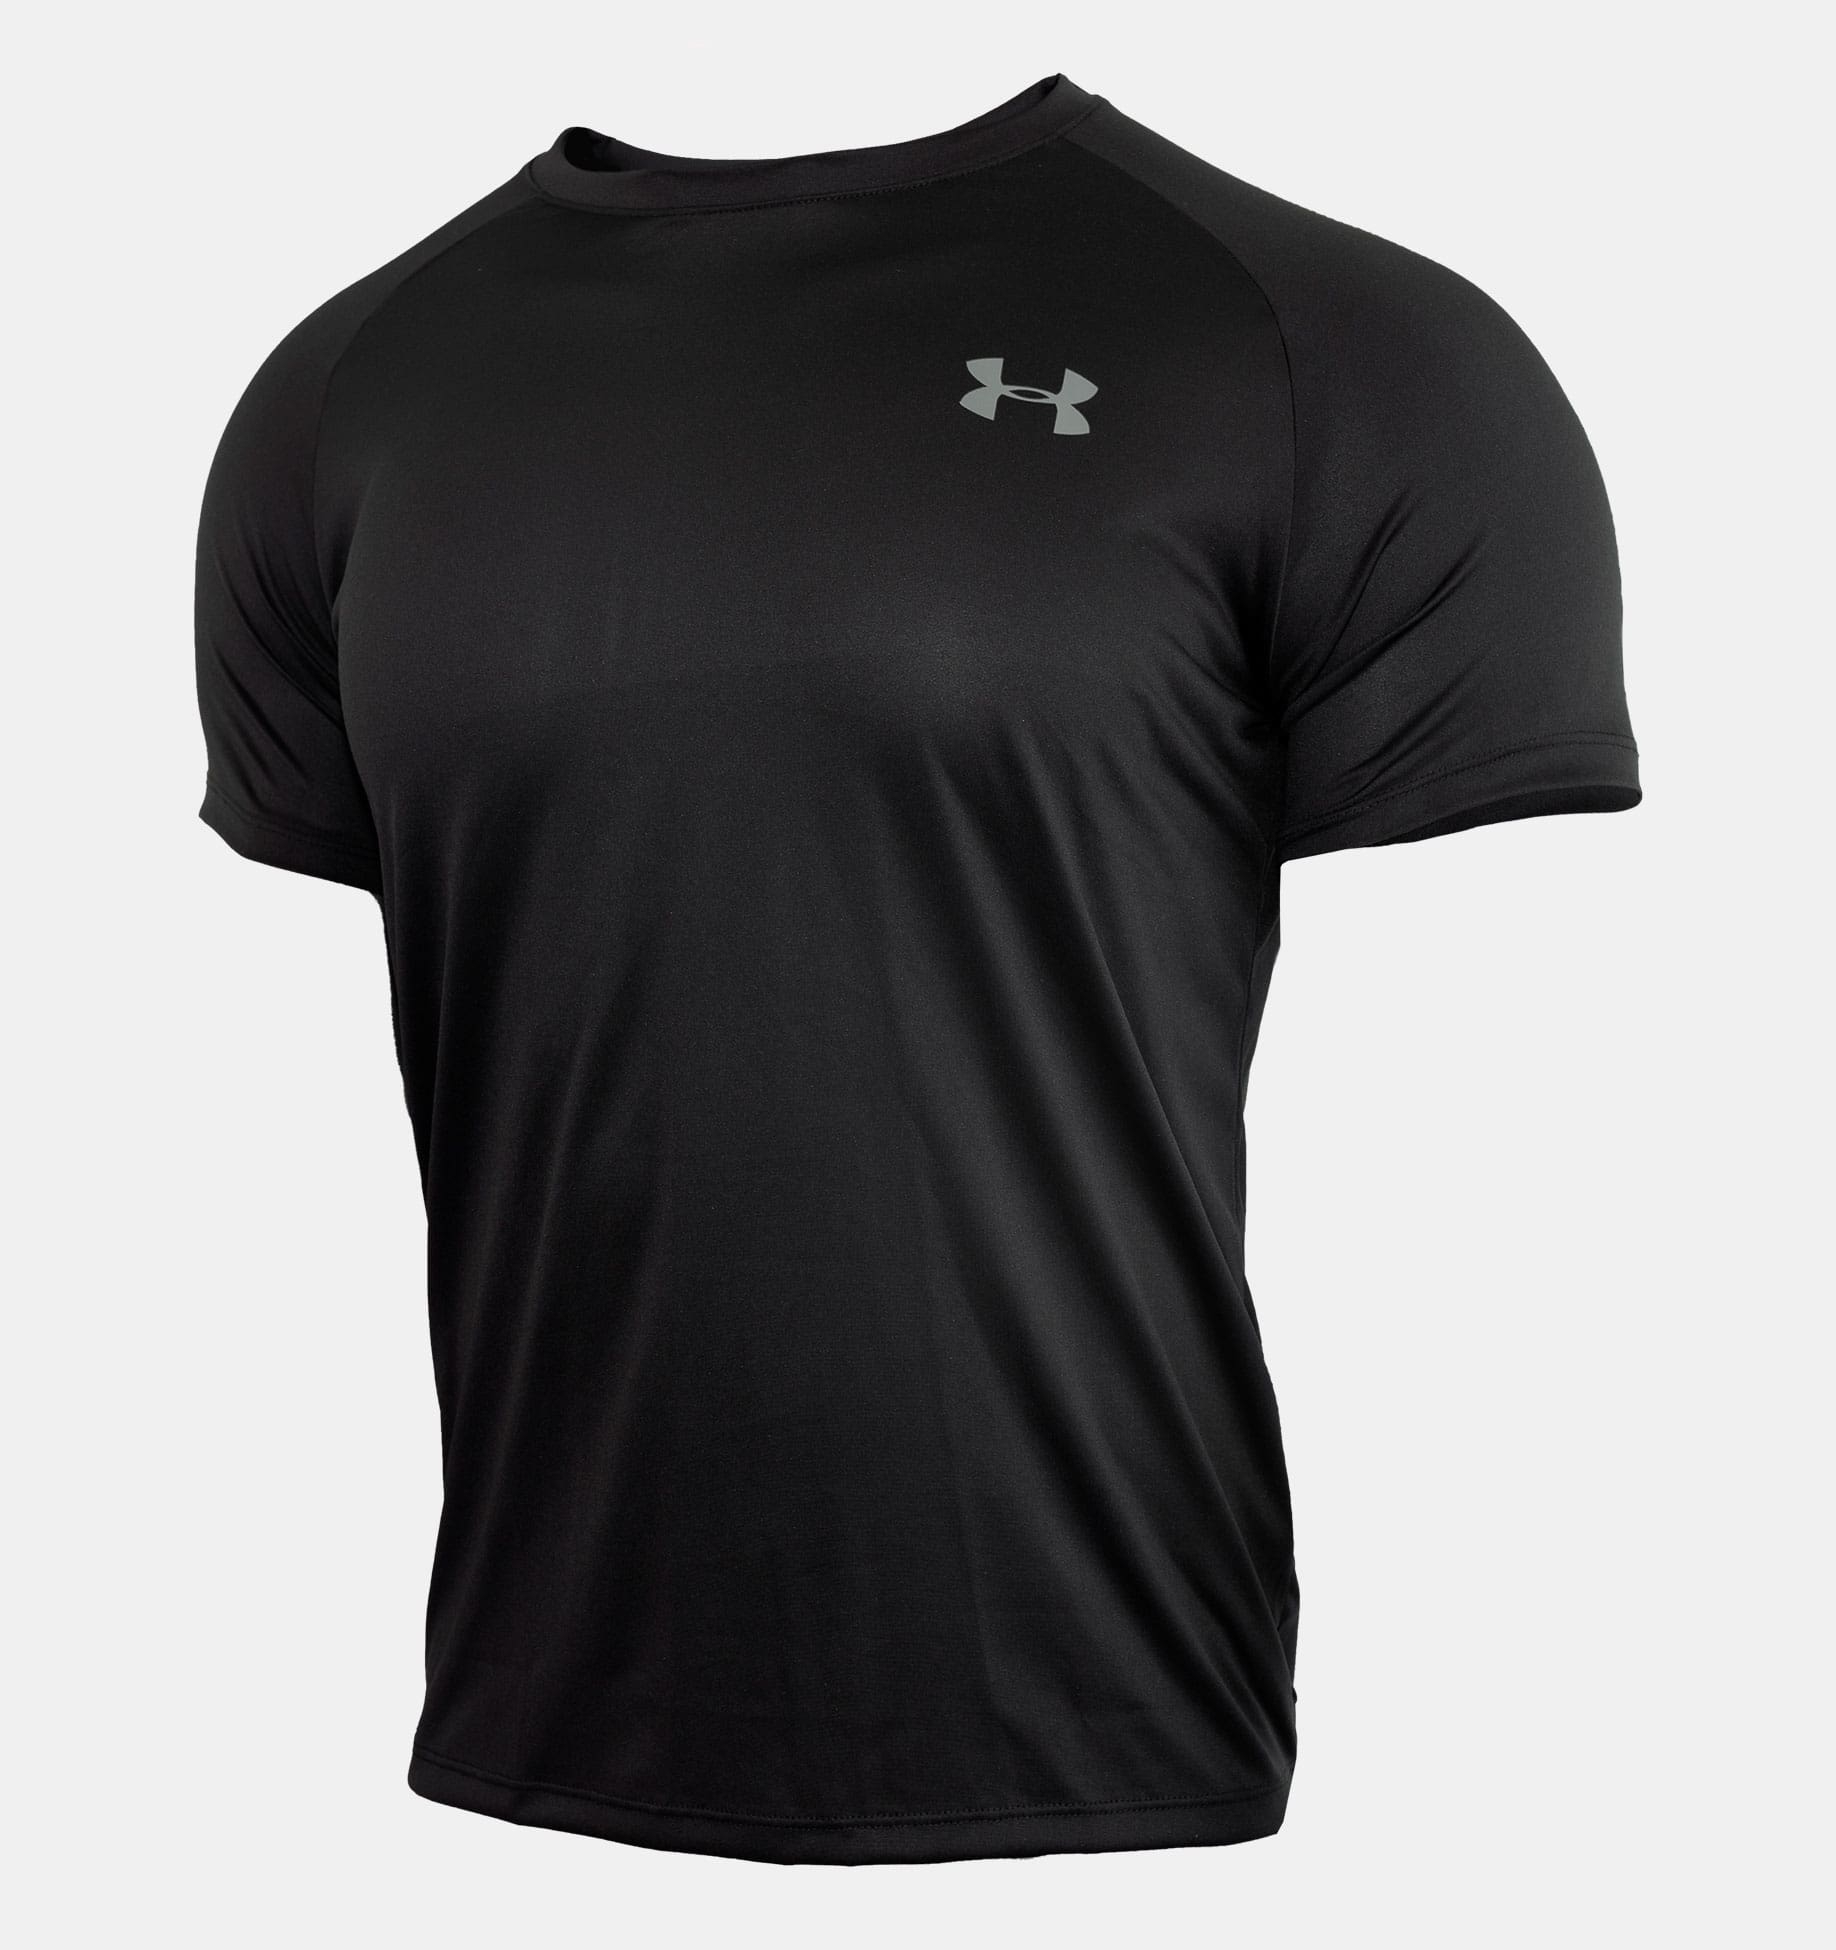 https://www.underarmour.com.ar/on/demandware.static/-/Sites-underarmour_staging/default/dw4a9fbd98/new_images/1354529/1354529-1.jpeg